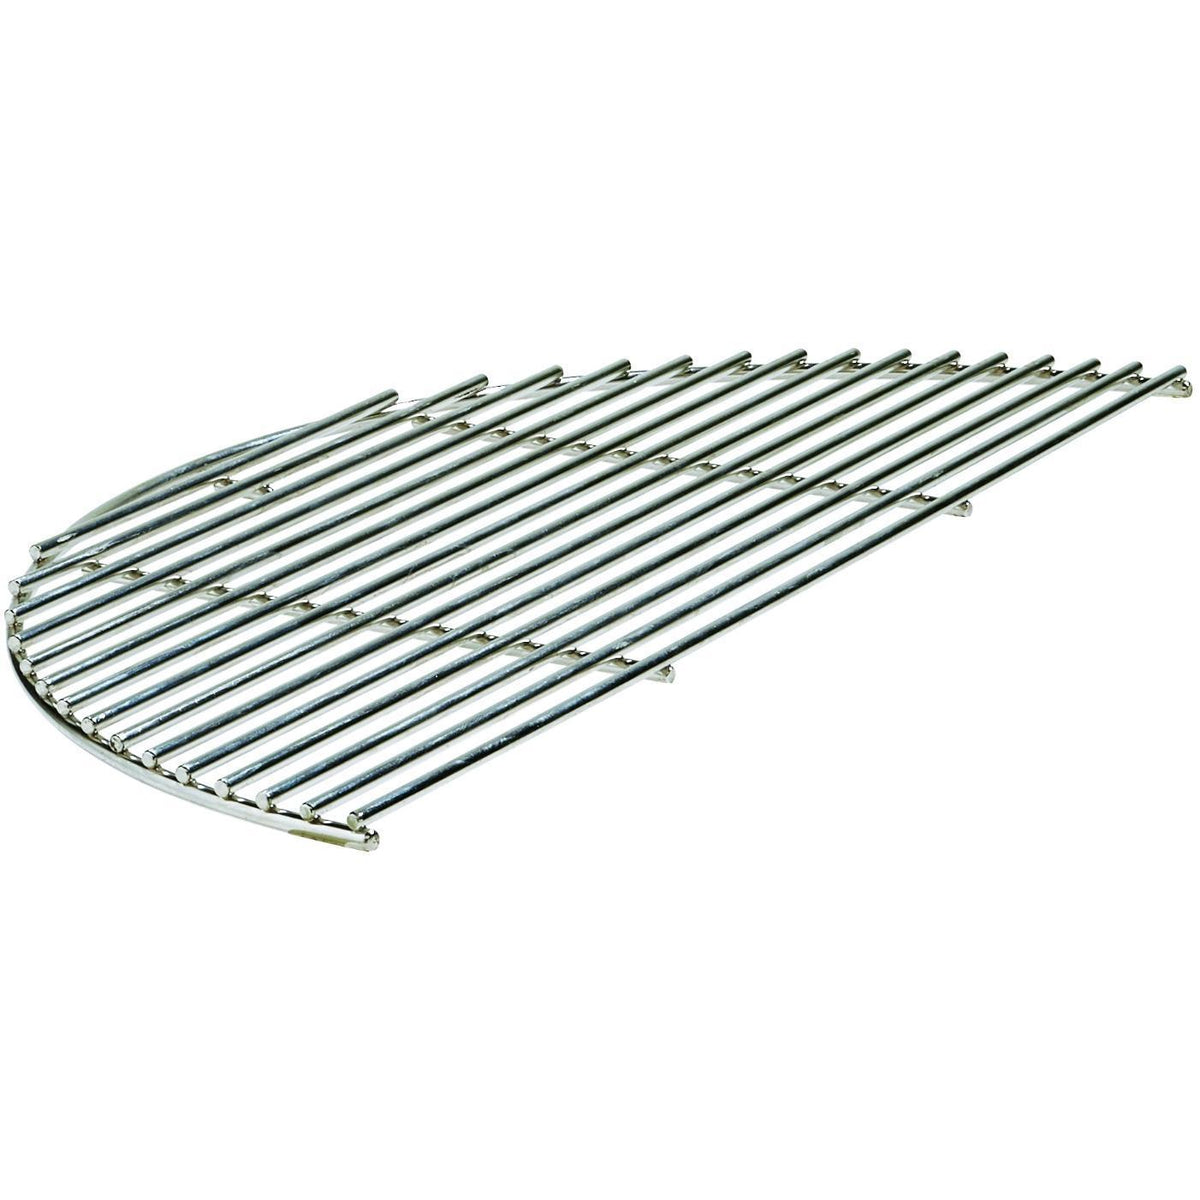 Kamado Joe Grill and Oven Accessories Grids BJ-HCG IMAGE 1